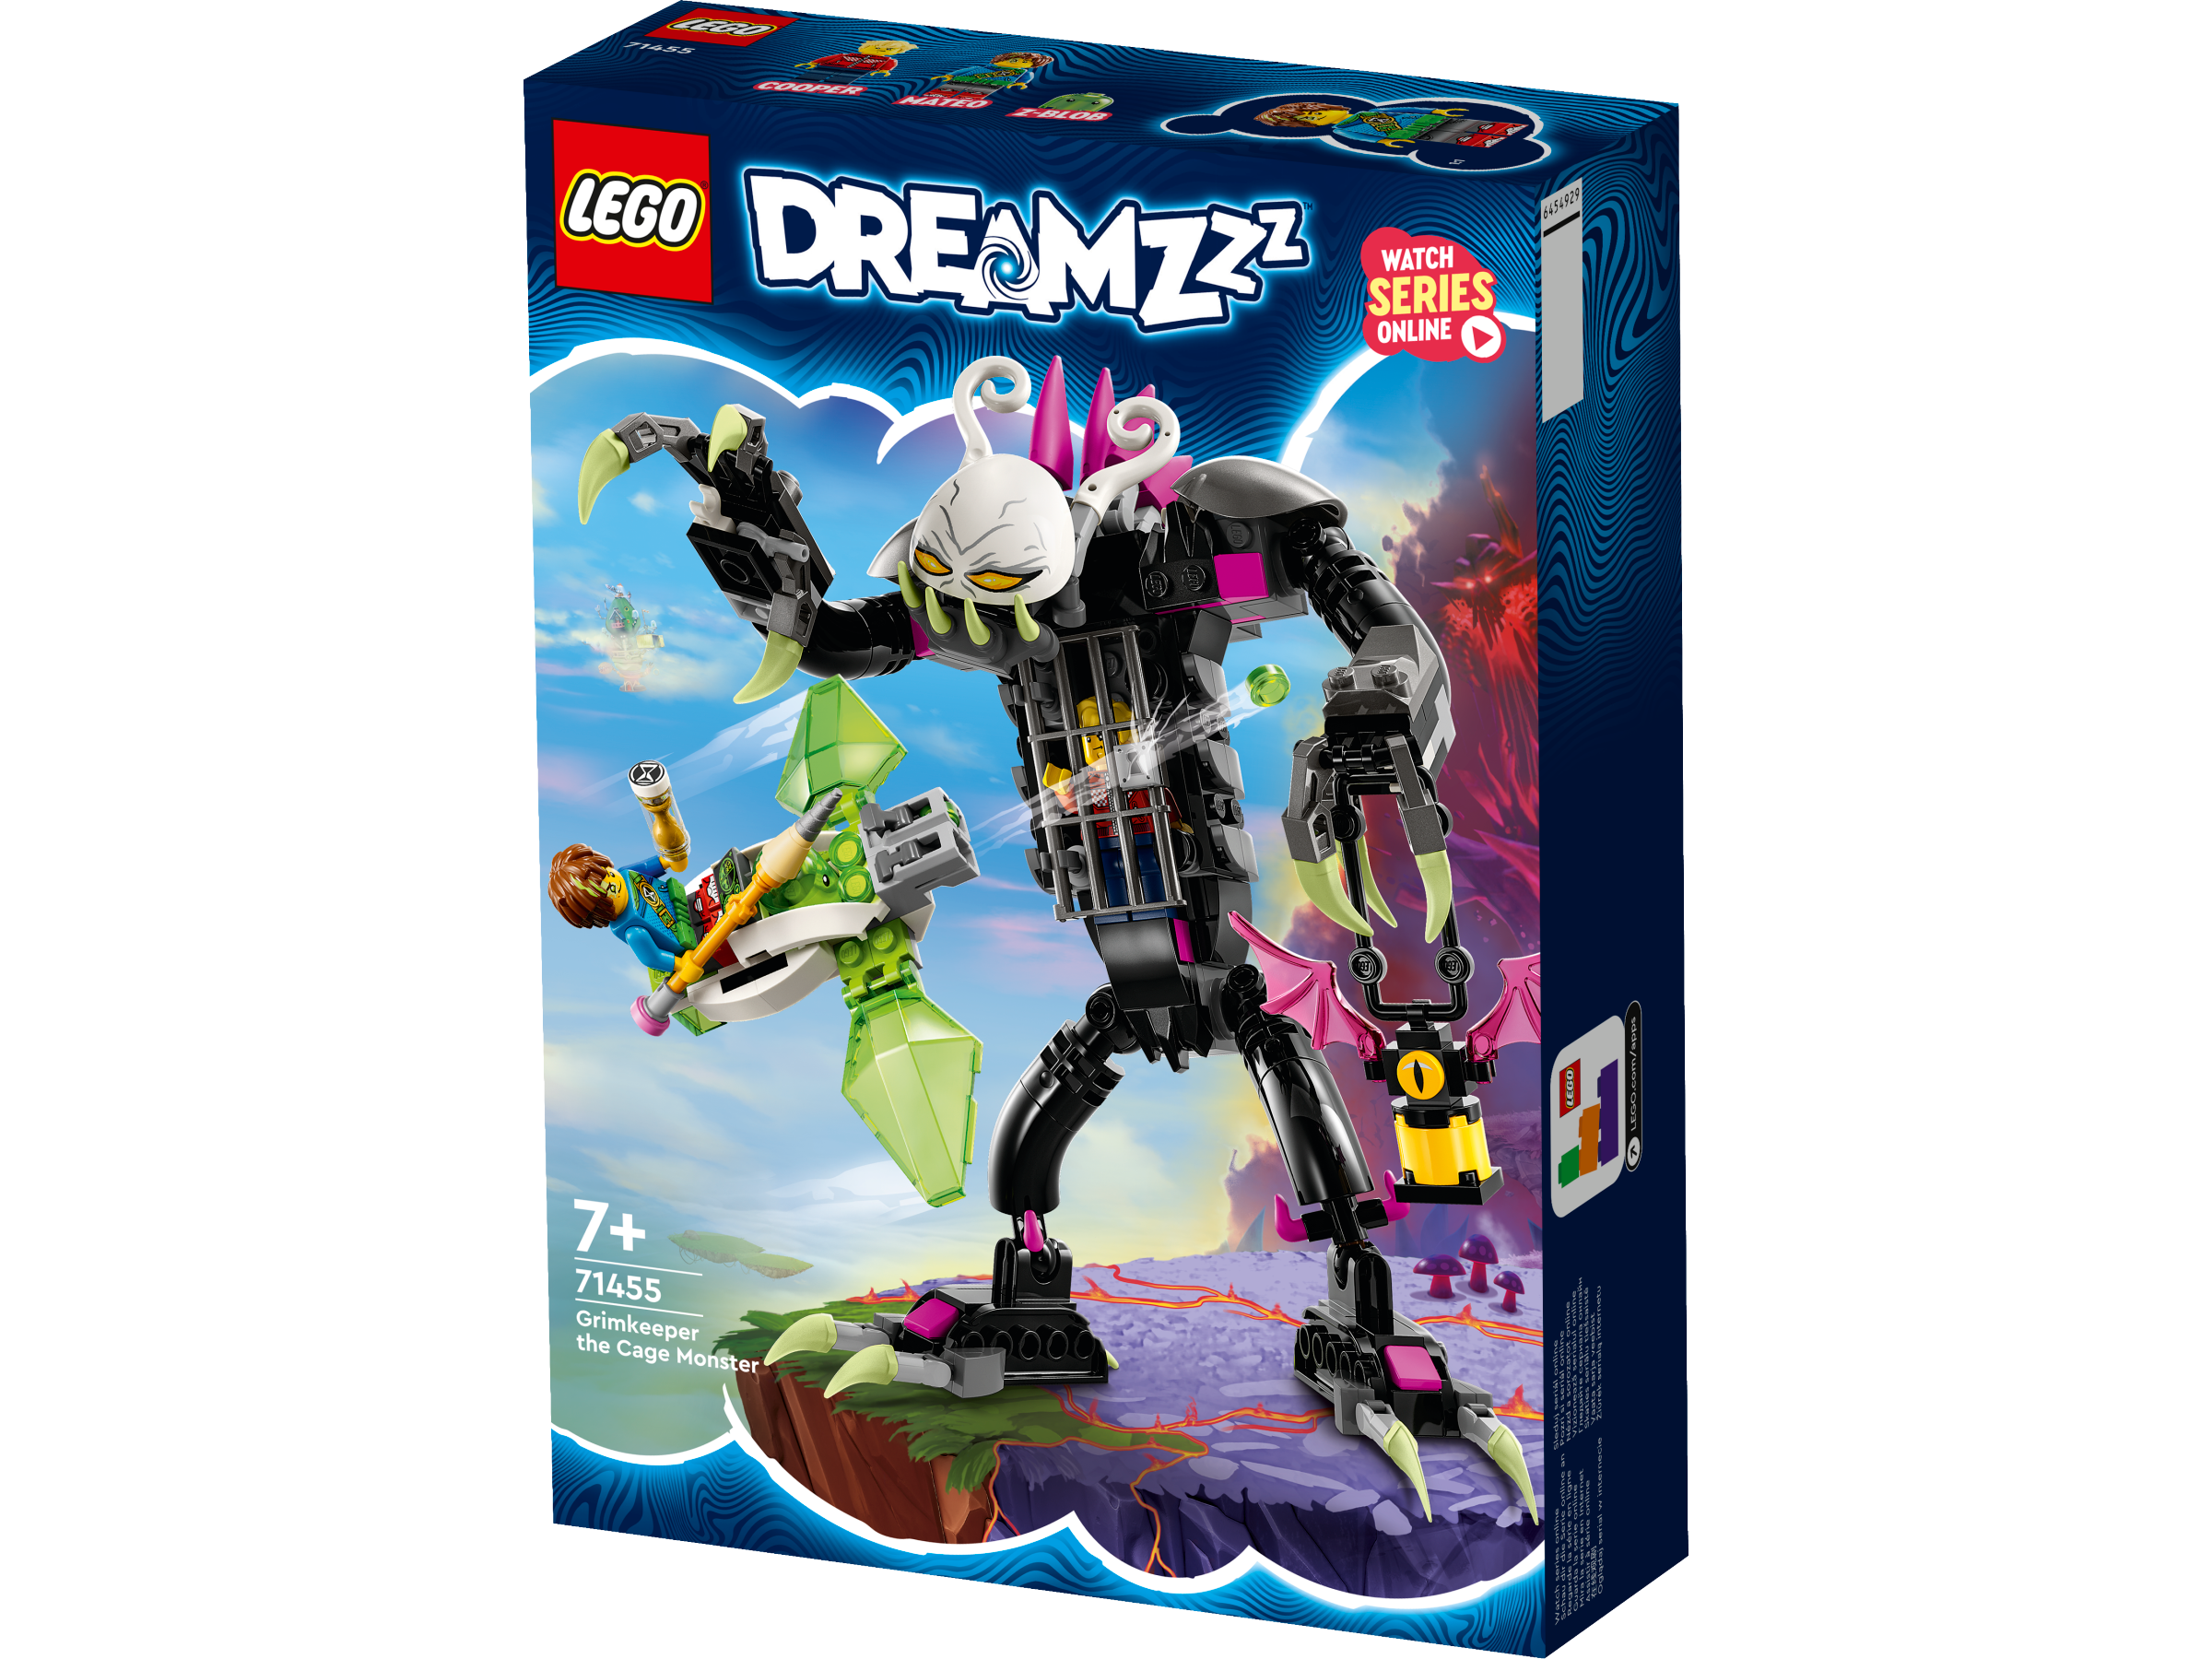 Lego 71455 Grimkeeper the Cage Monster